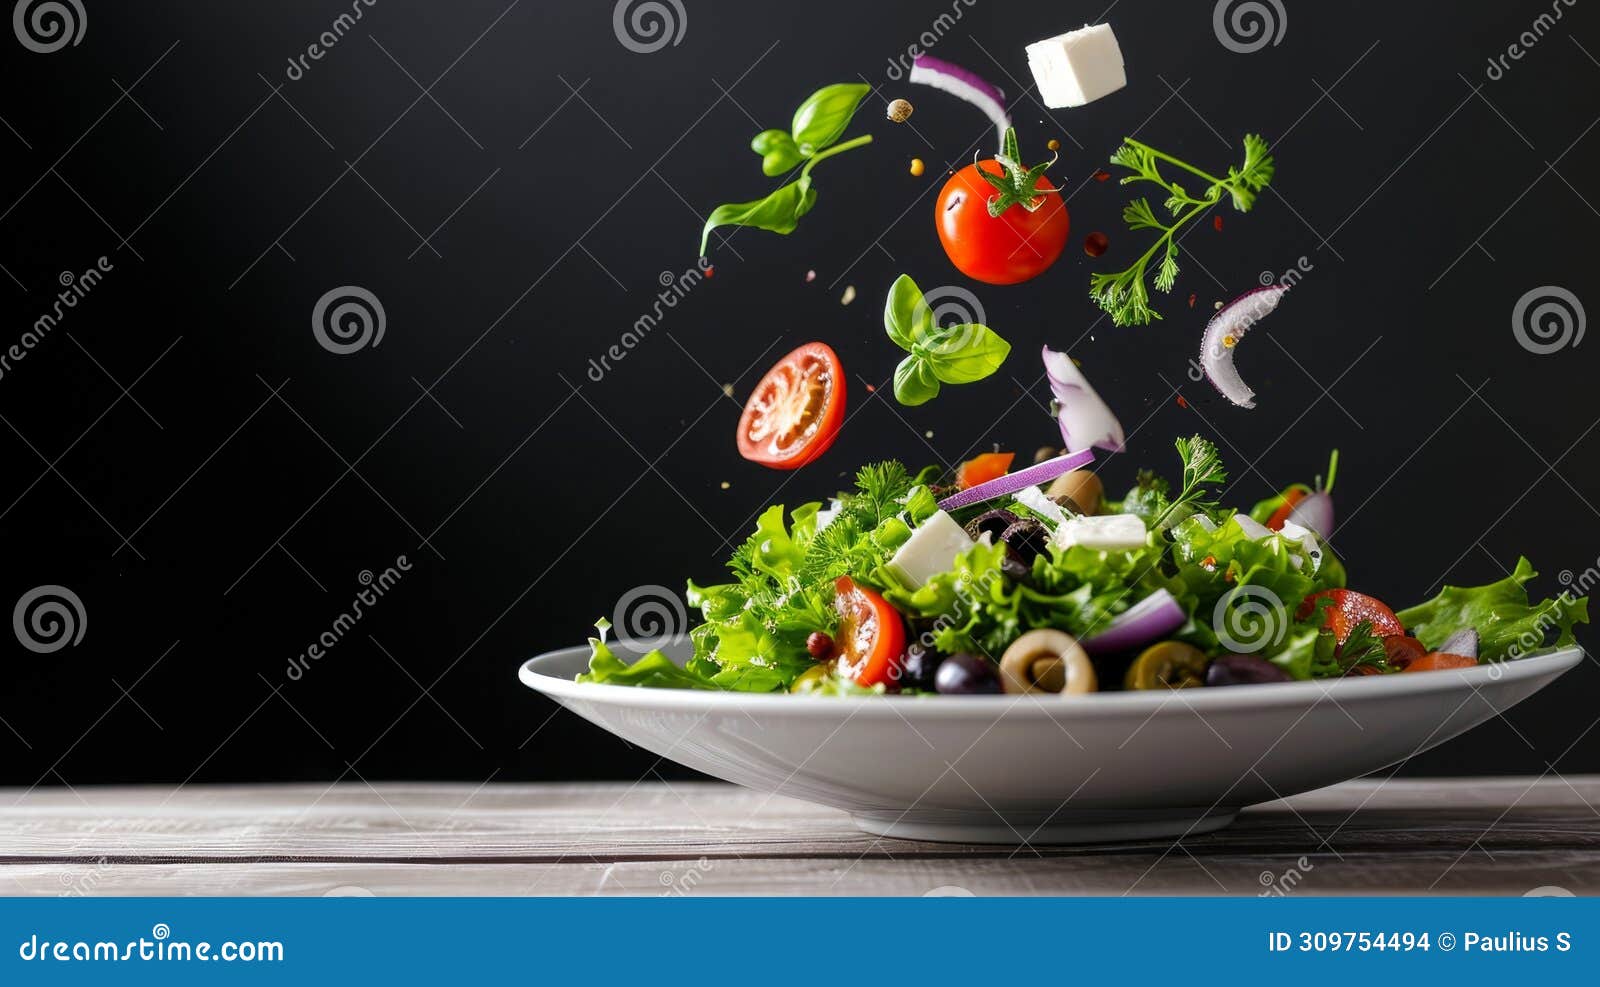 fresh mediterranean delight: vibrant salad composition suspended in mid-air on a white plate, adorne